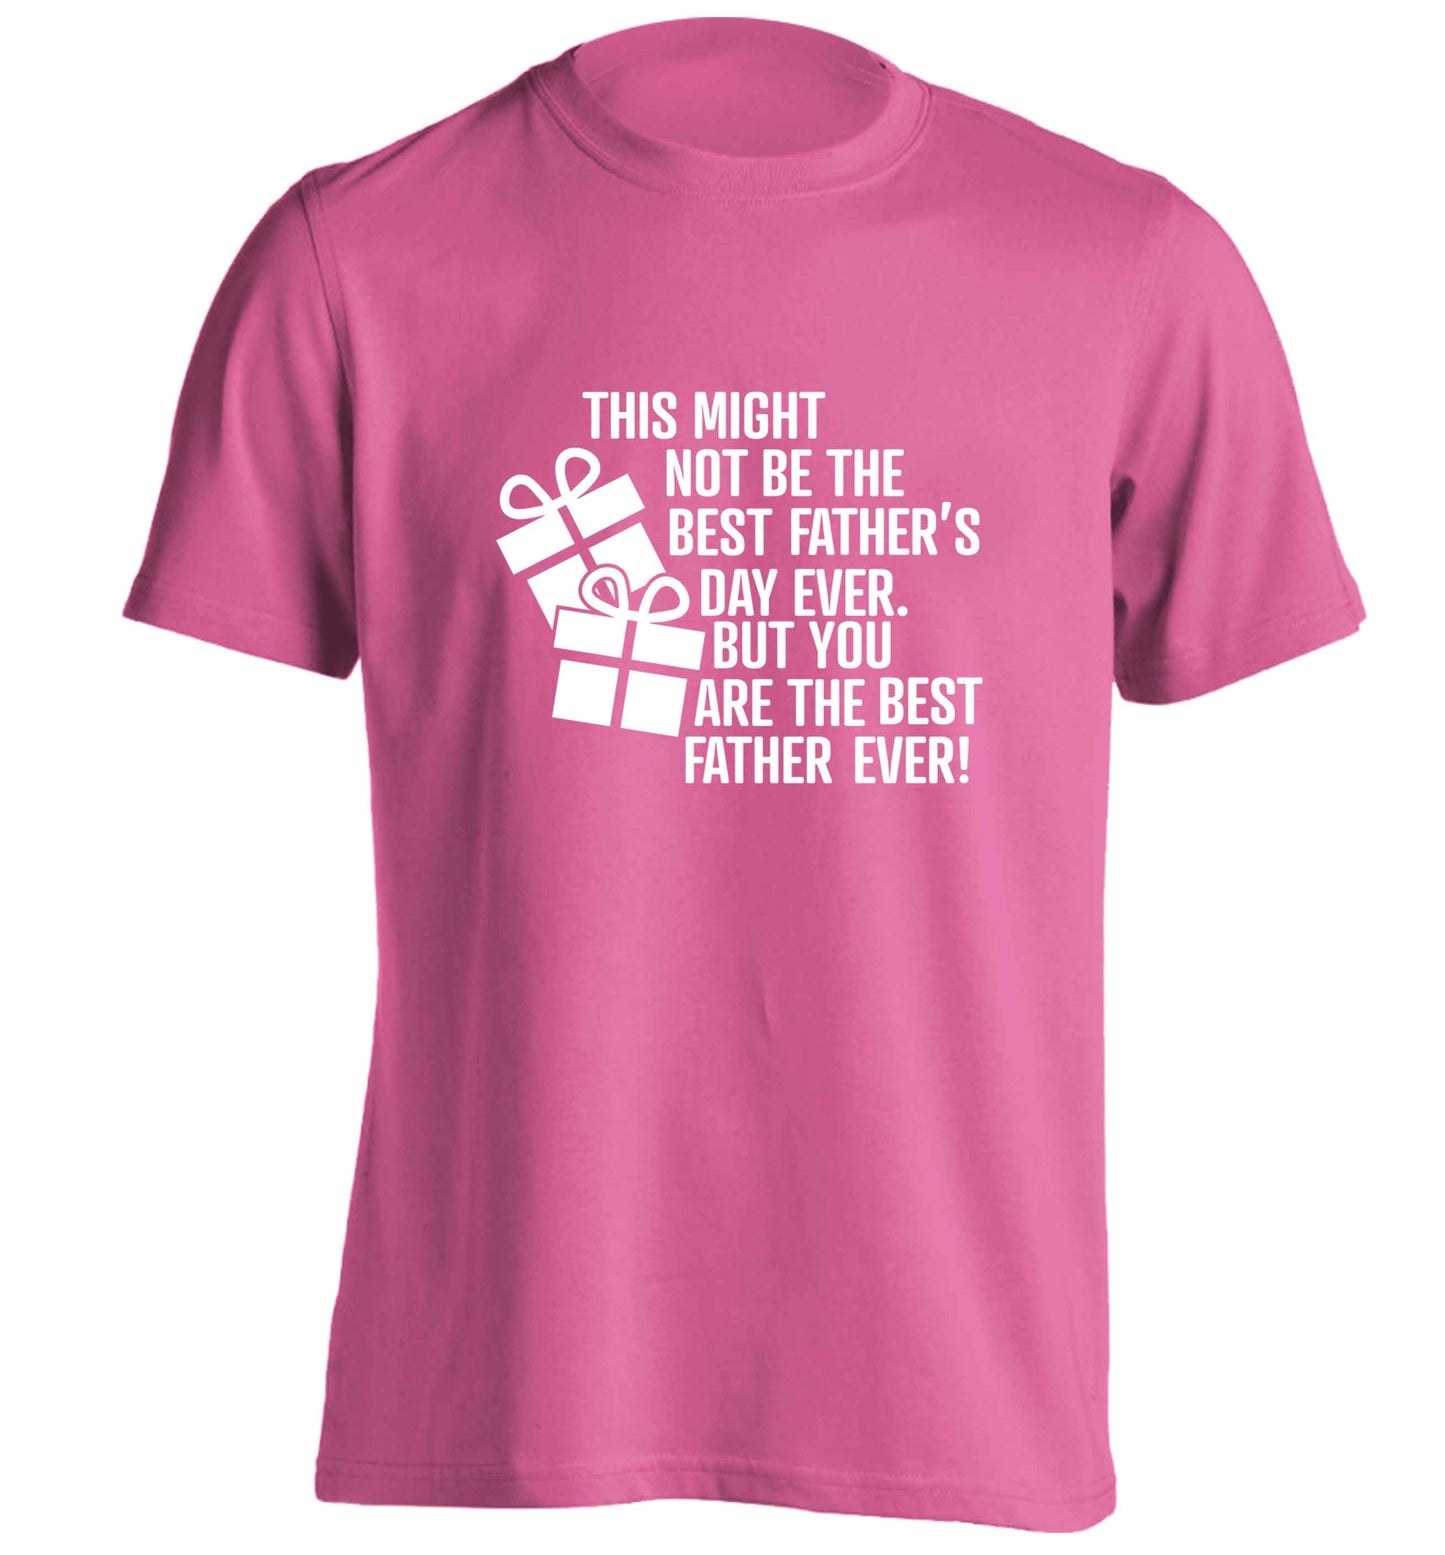 It might not be the best Father's Day ever but you are the best father ever! adults unisex pink Tshirt 2XL